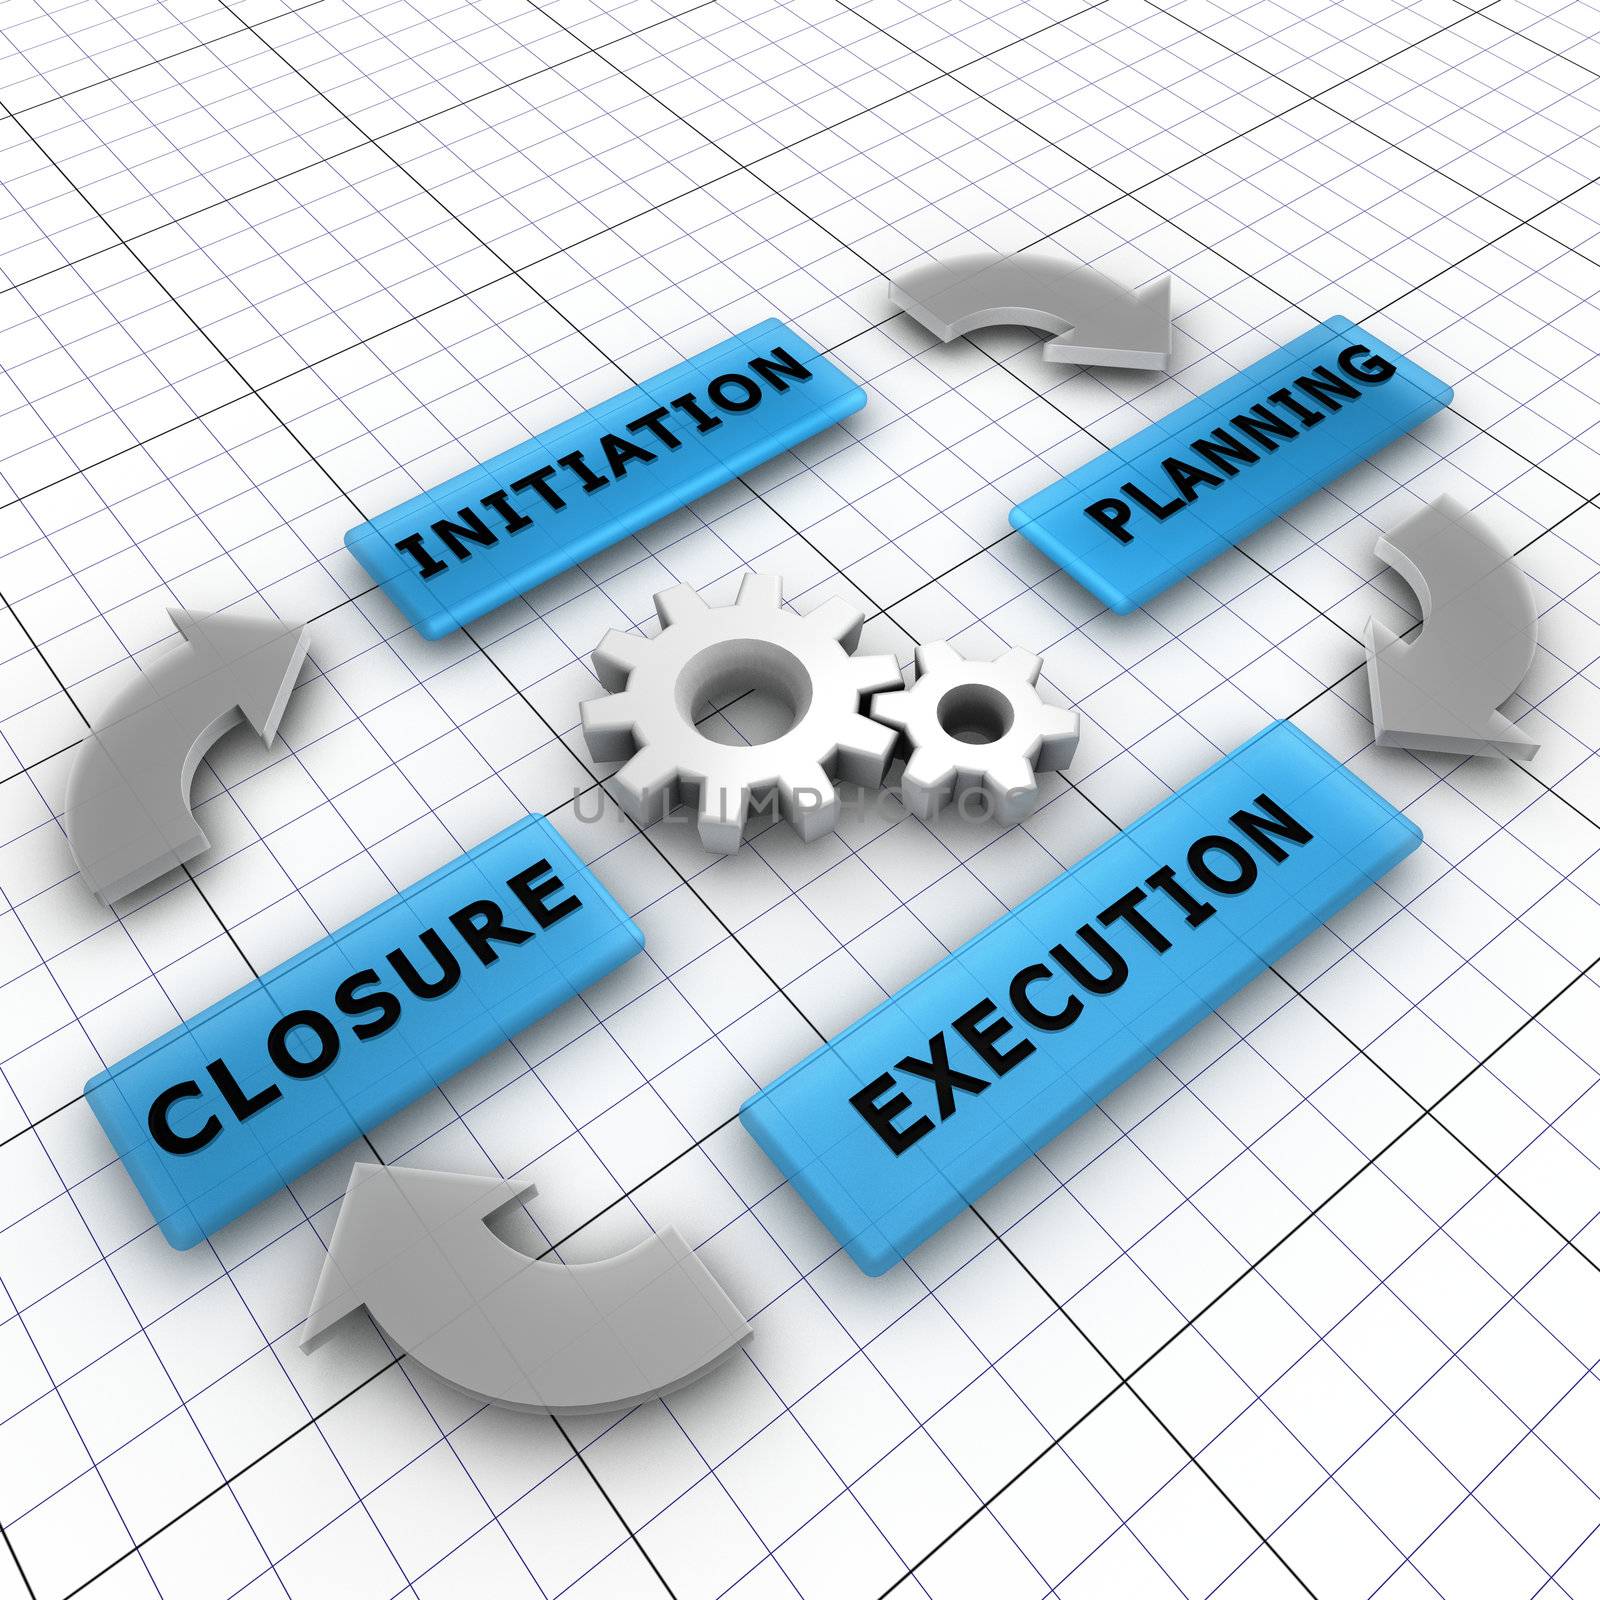 Four main steps of a project life cycle: initiation, planning, execution, closure